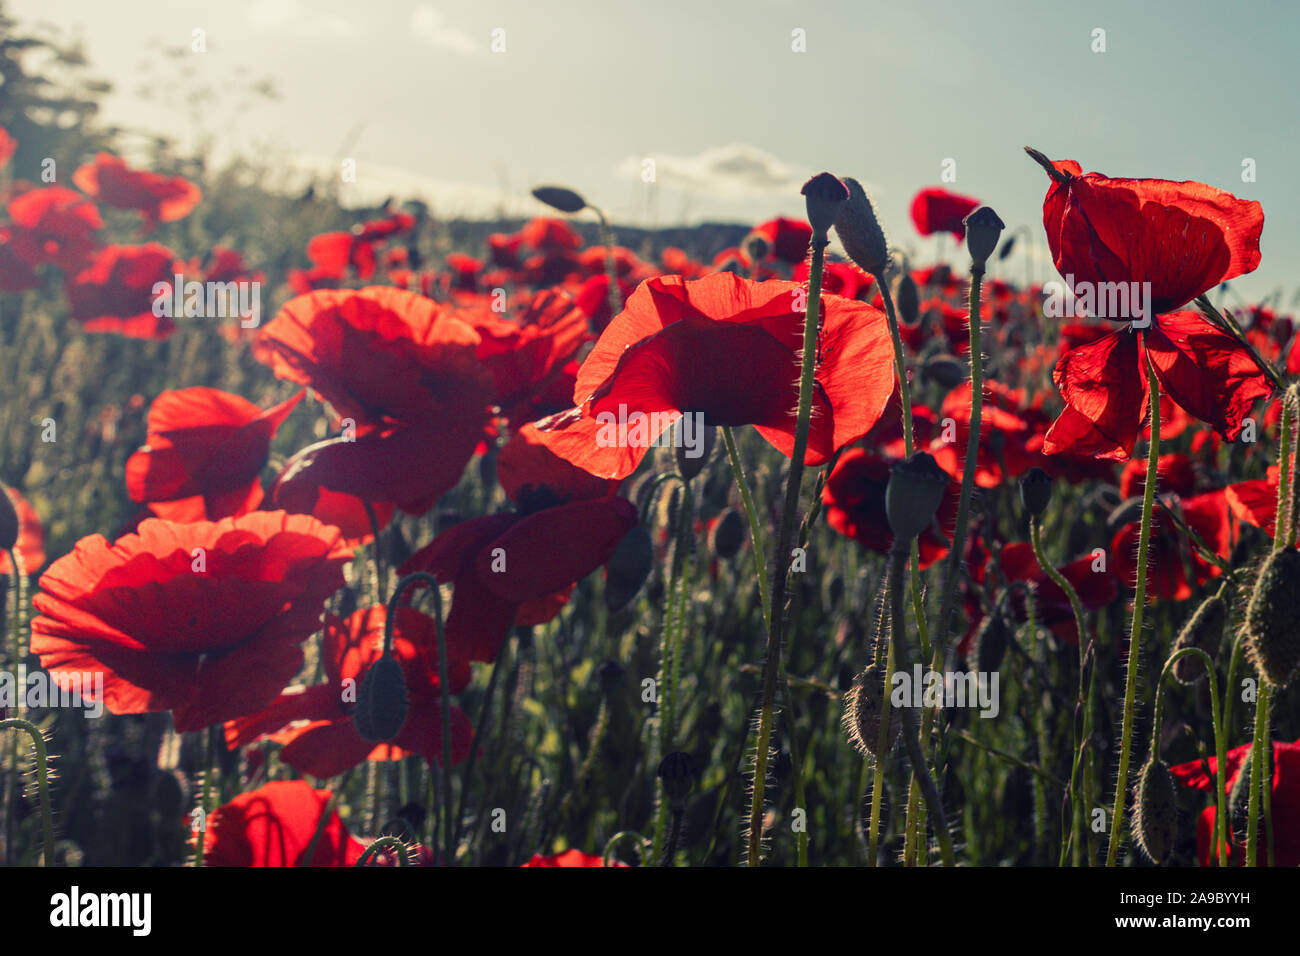 Backlit Red Poppies growing in a cornfield near the village of Hassop, Derbyshire Peak District.England, UK Stock Photo